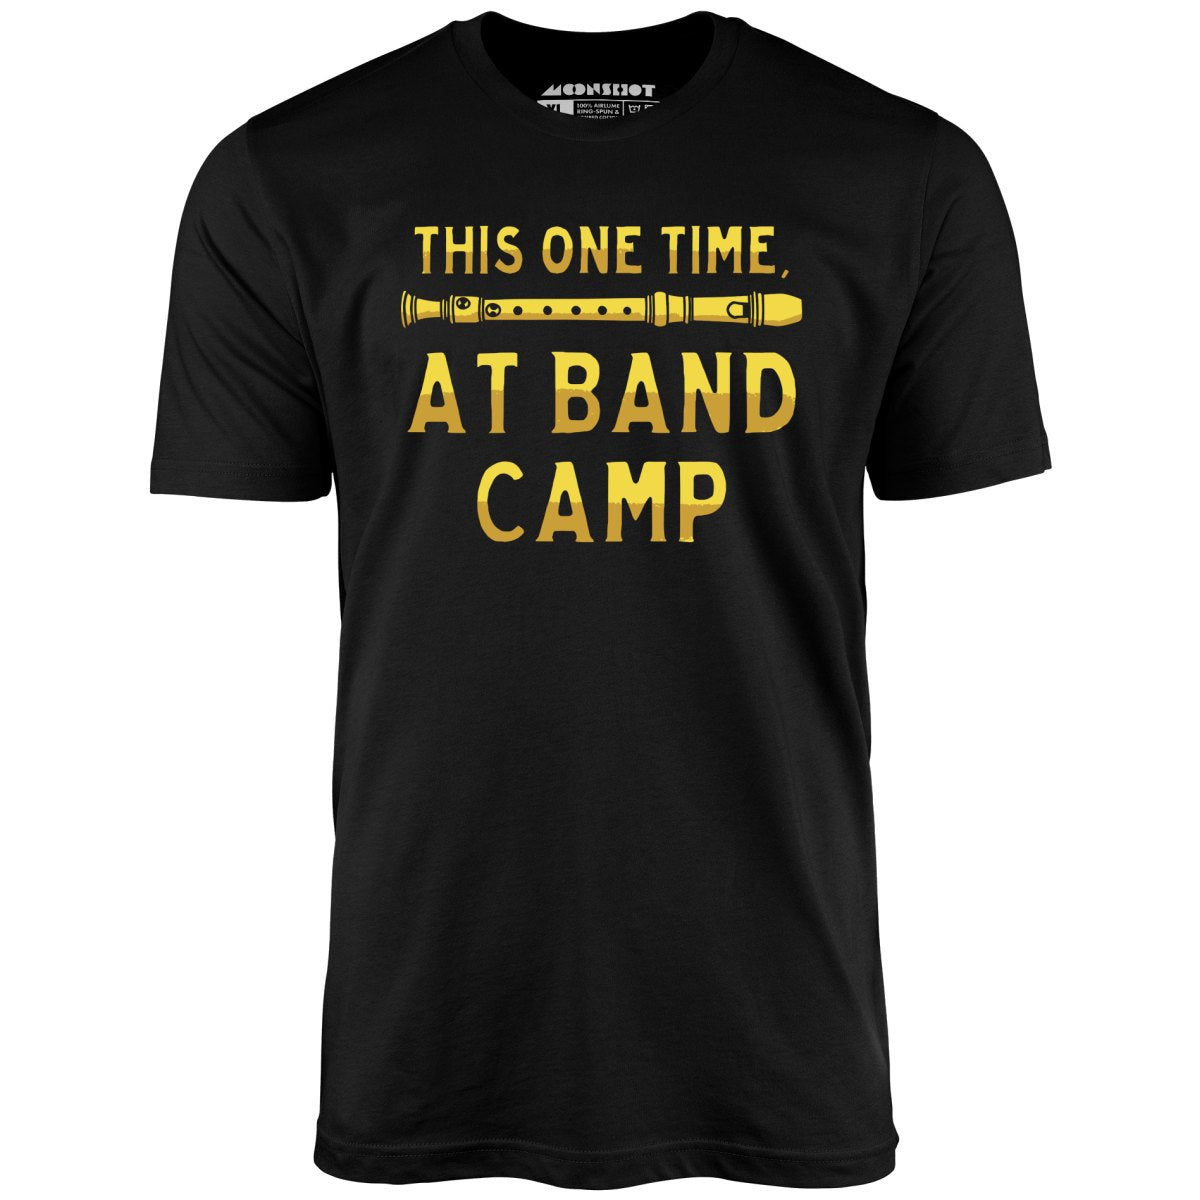 This One Time, at Band Camp - Unisex T-Shirt